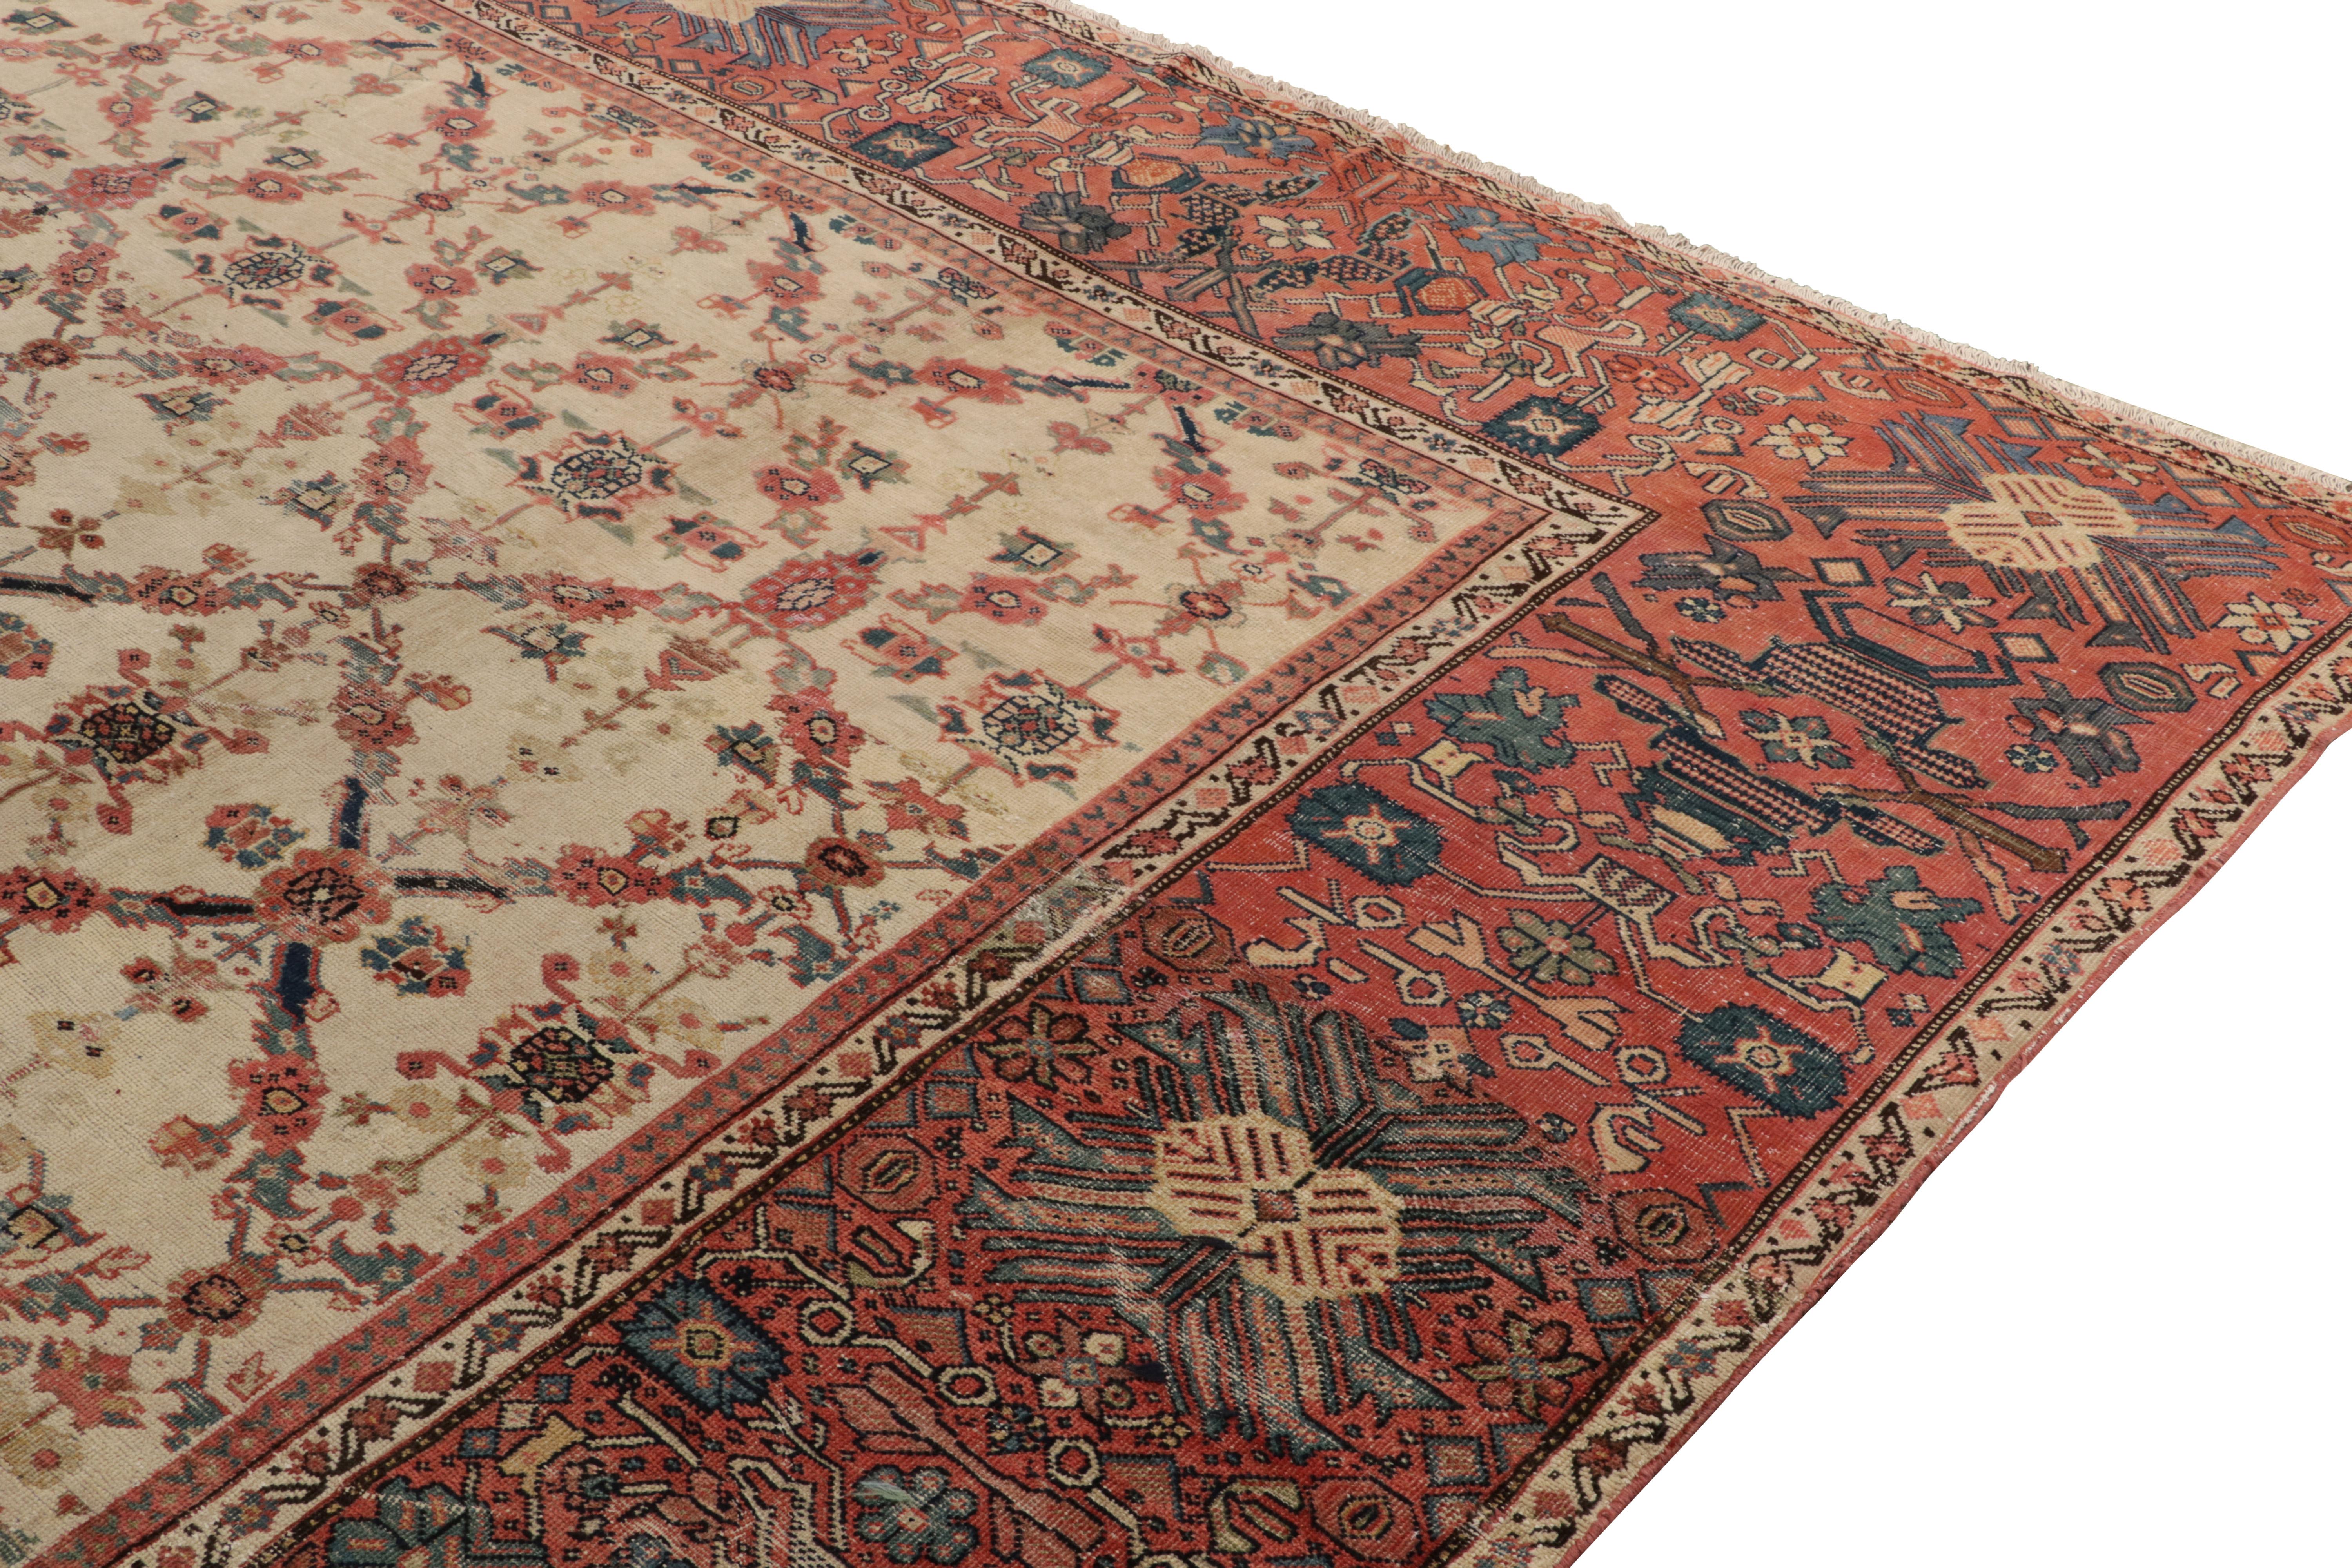 Late 19th Century Antique Persian Sultanabad Rug in Beige and Red Floral Patterns For Sale